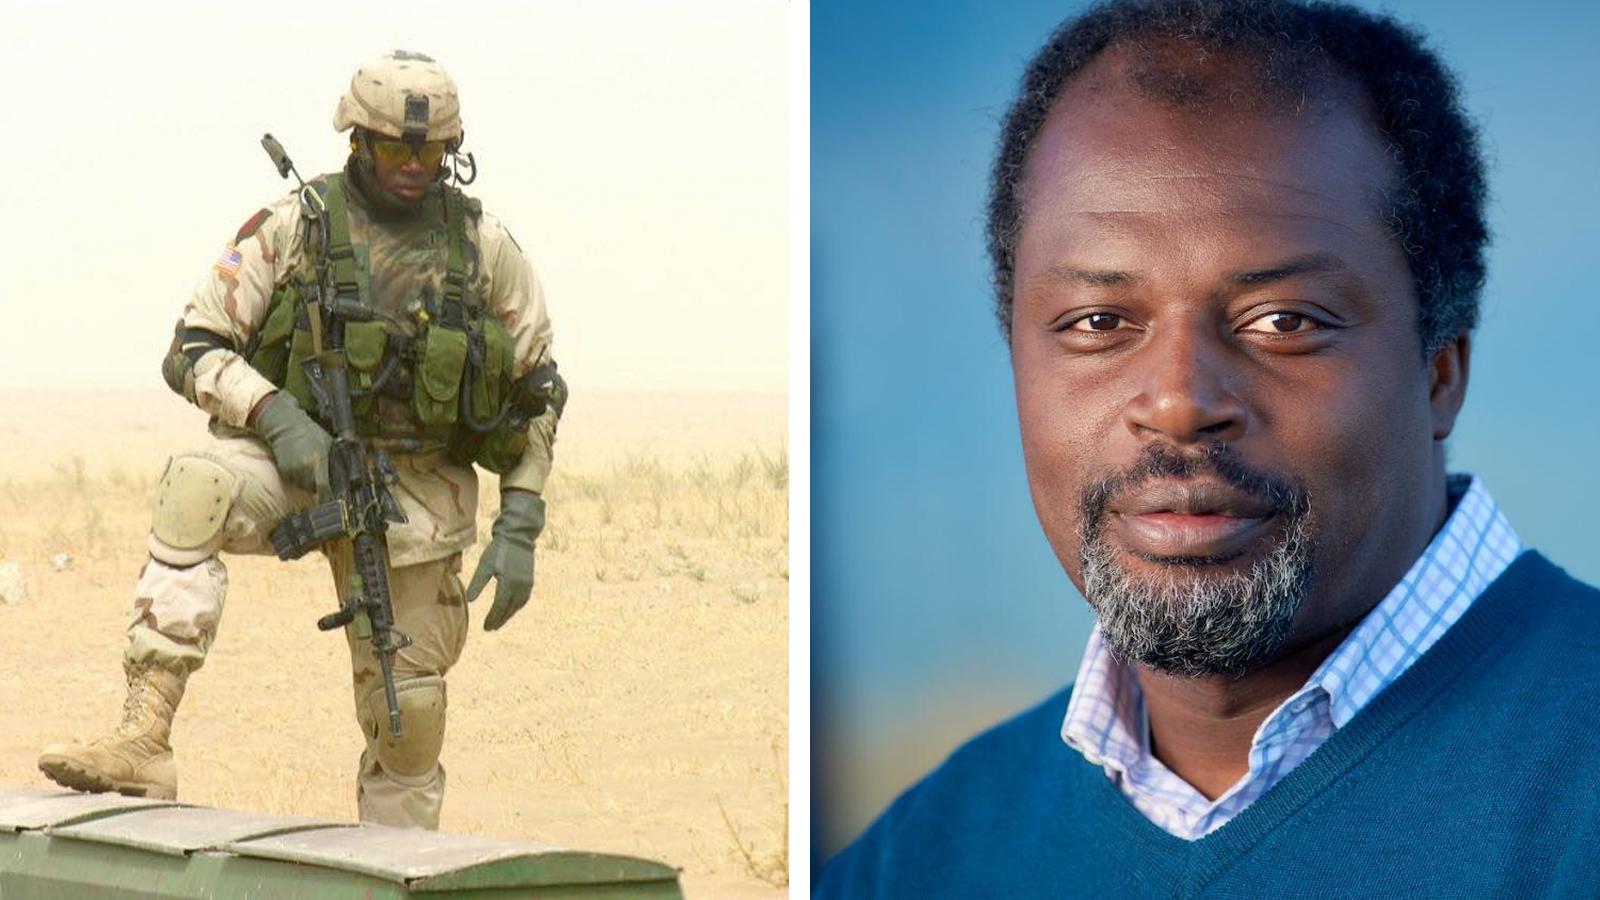 Kenrick Cato standing in combat fatigues of the U.S. Army (left) and head shot (right)